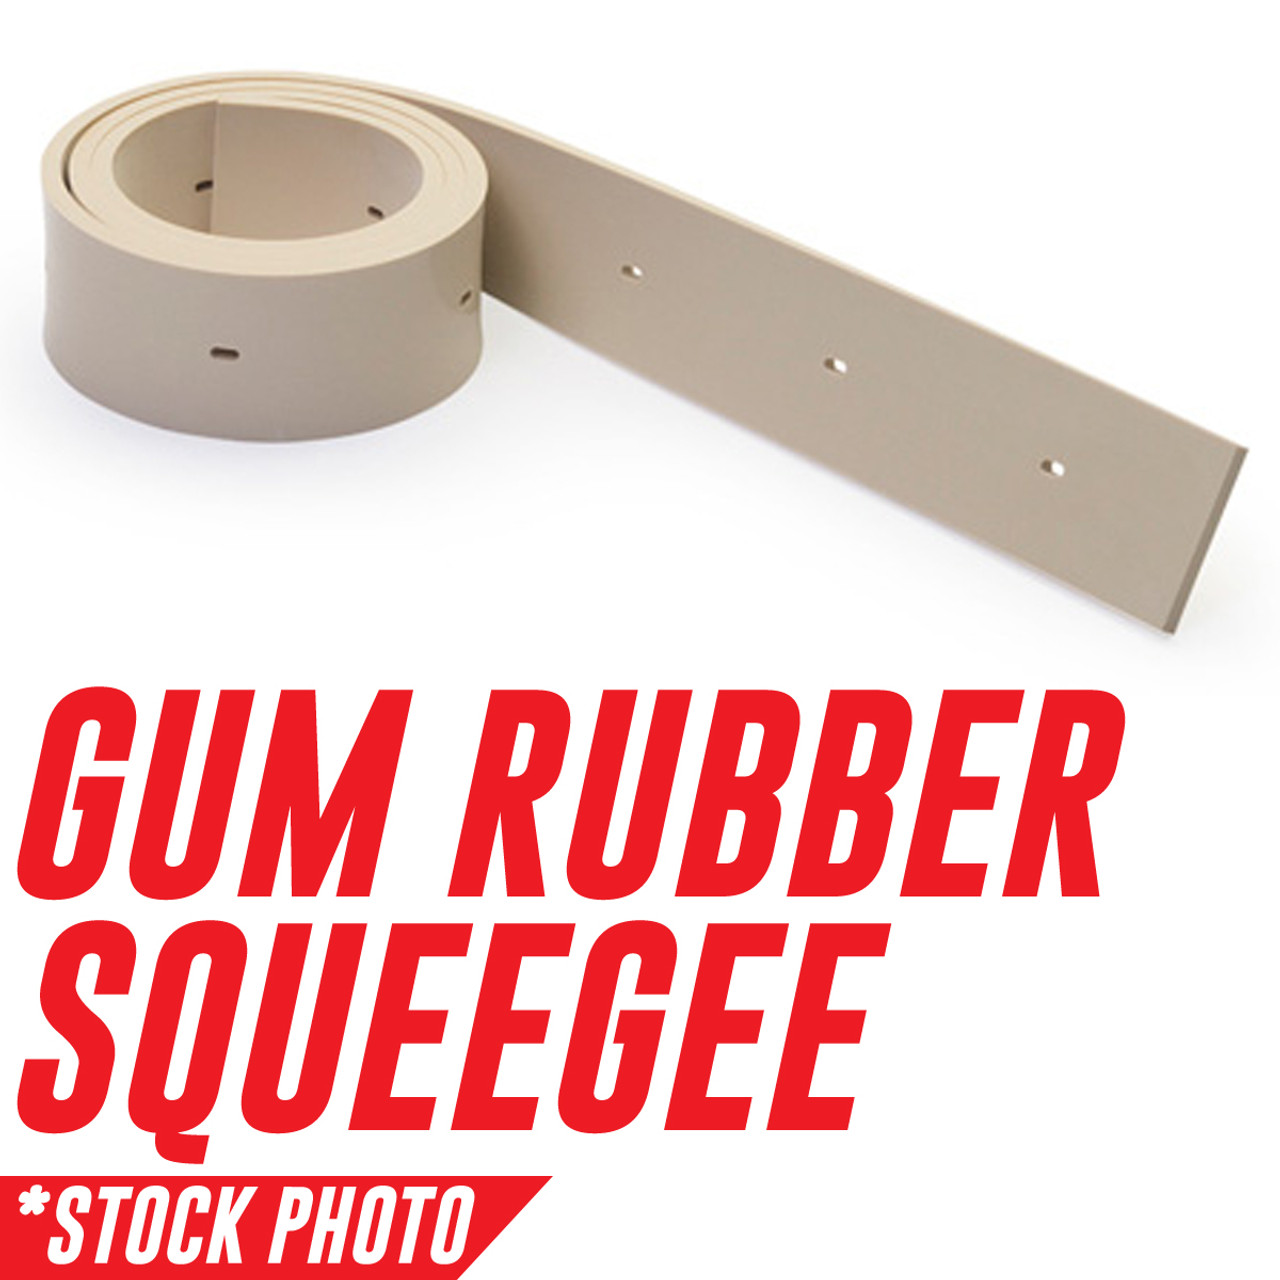 500-1235G: Squeegee, Side, Cylindrical, Tan Gum fits Factory Cat Models Pilot/RS